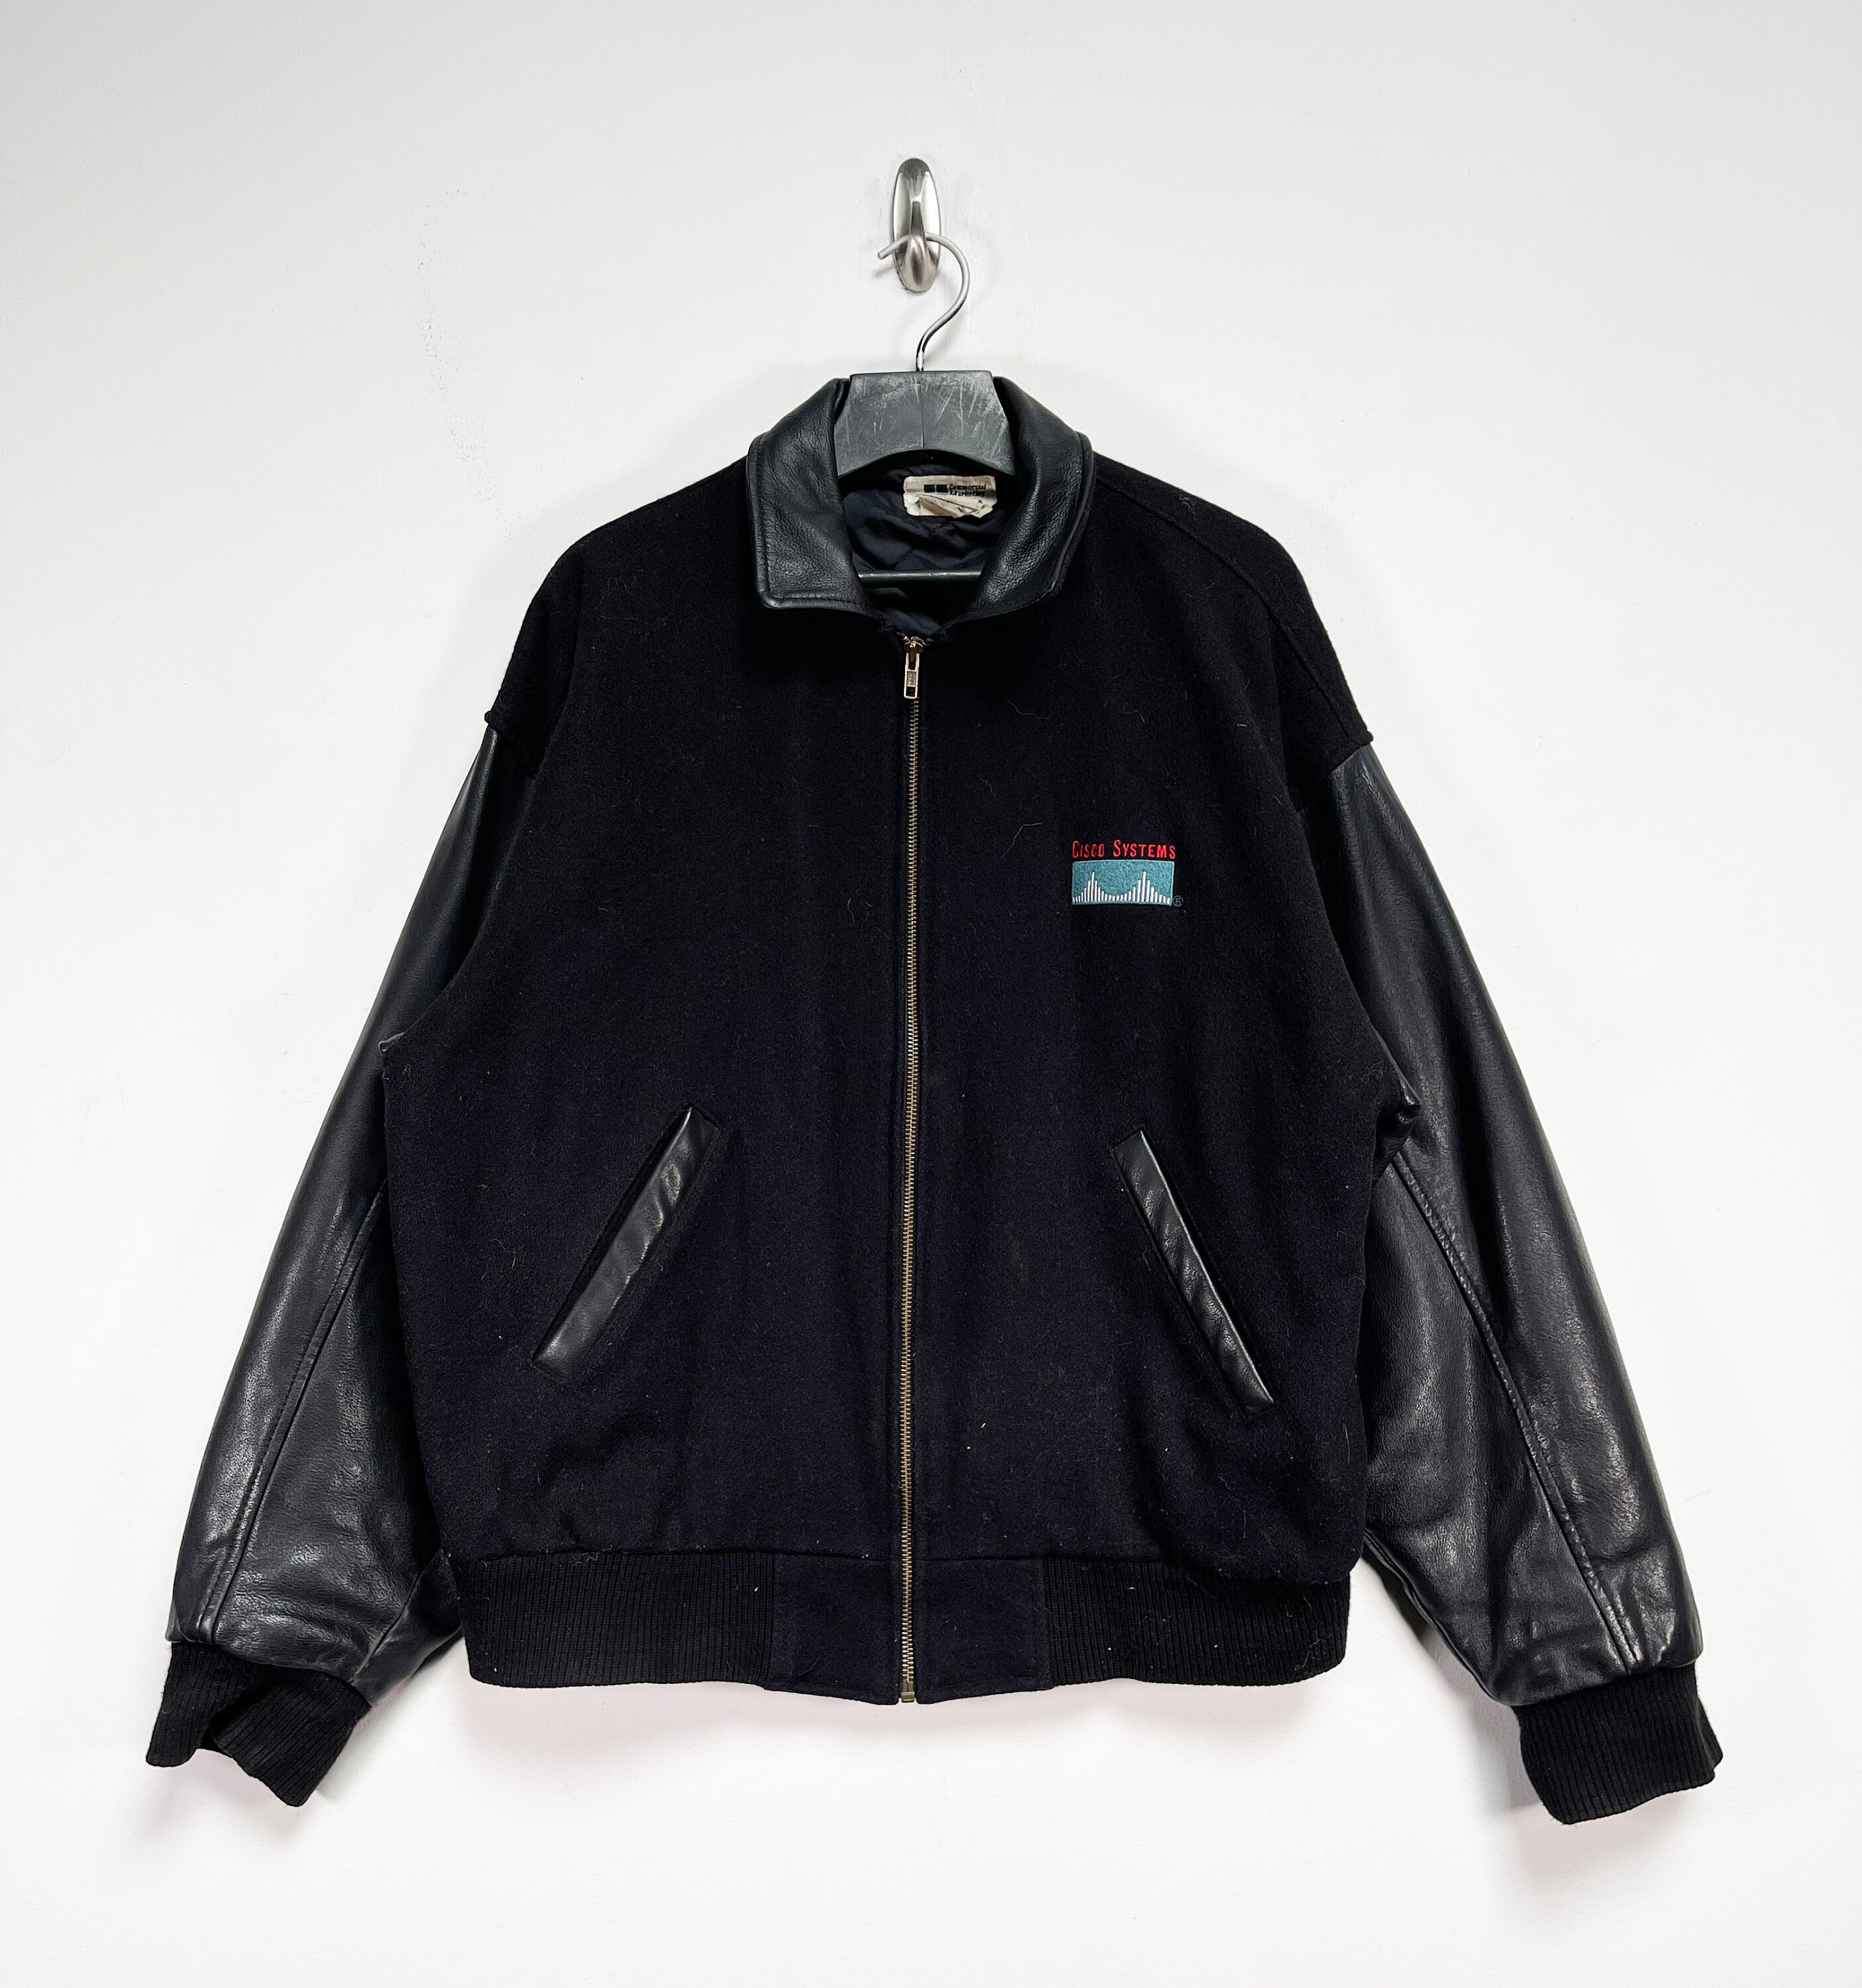 Cisco Systems wool leather jacket 90s XS